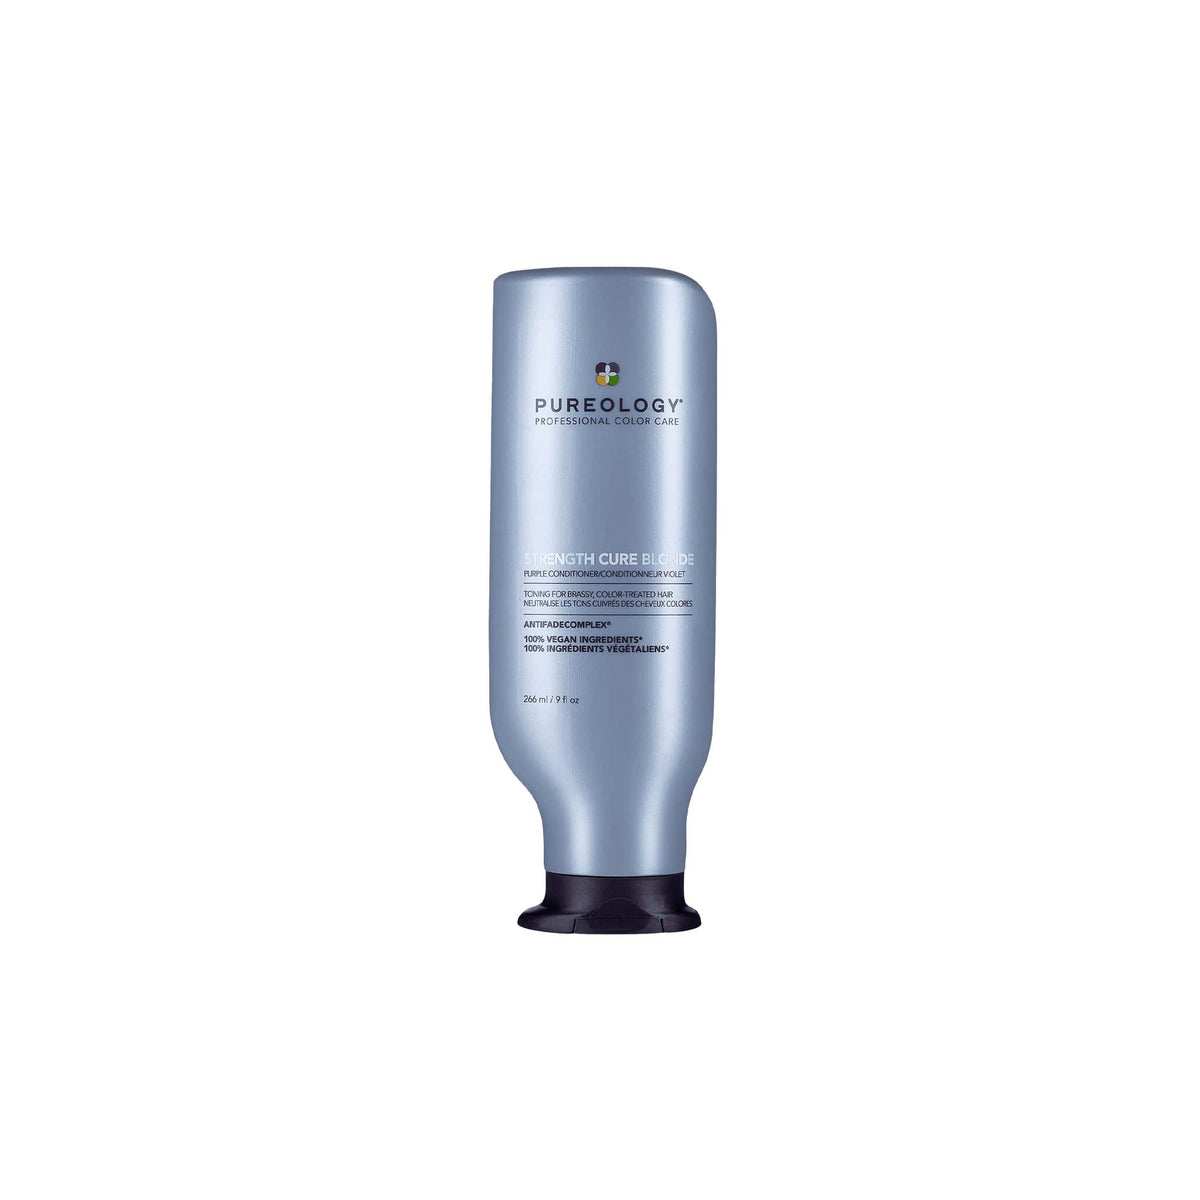 Pureology Strength Cure Best Blonde Conditioner | Retail Box